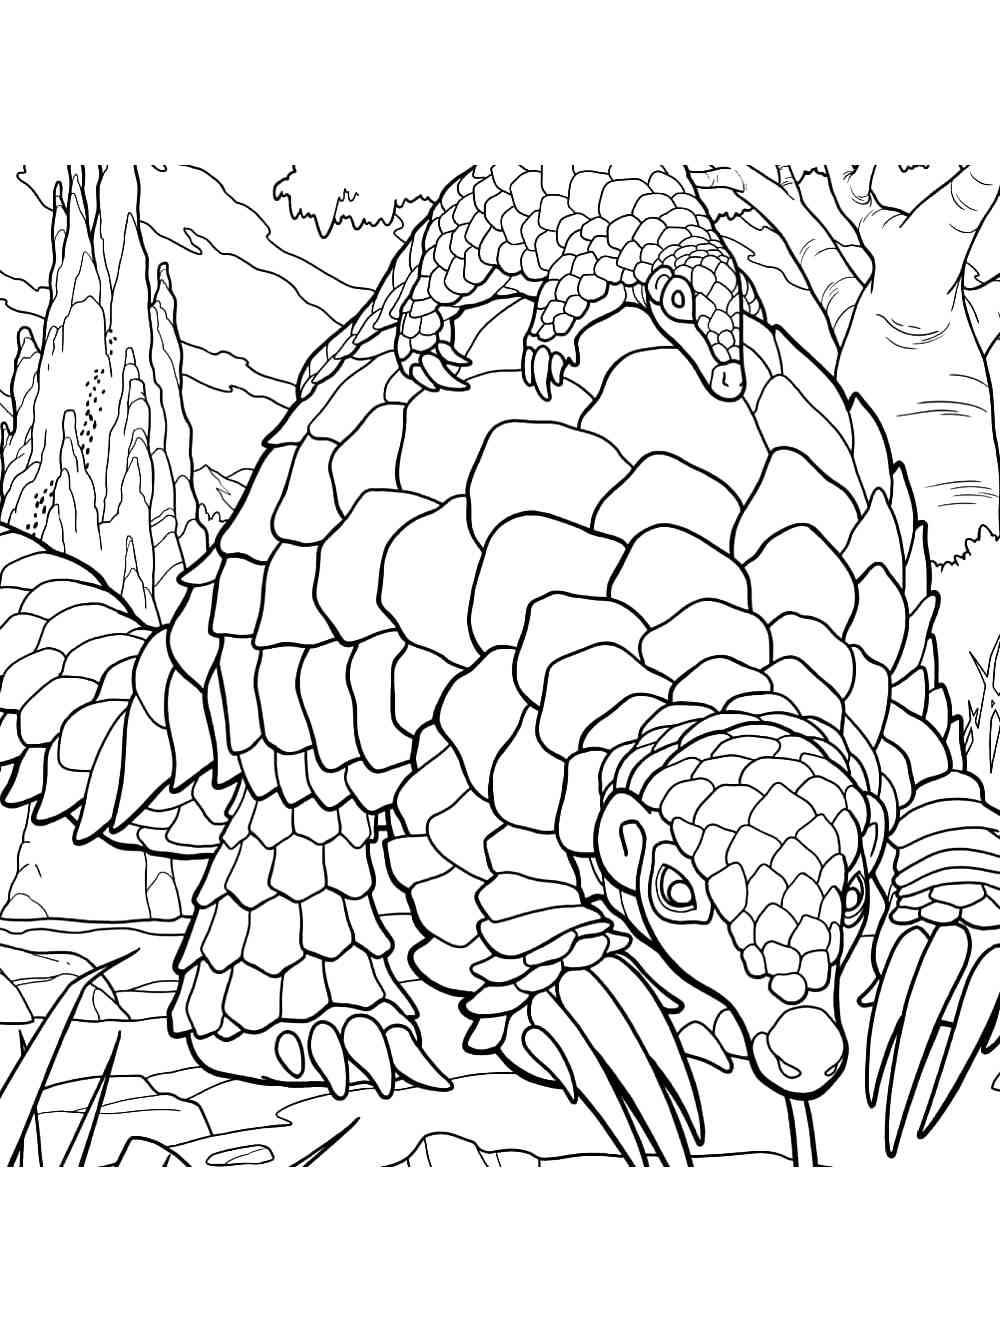 Pangolin with a cub coloring page